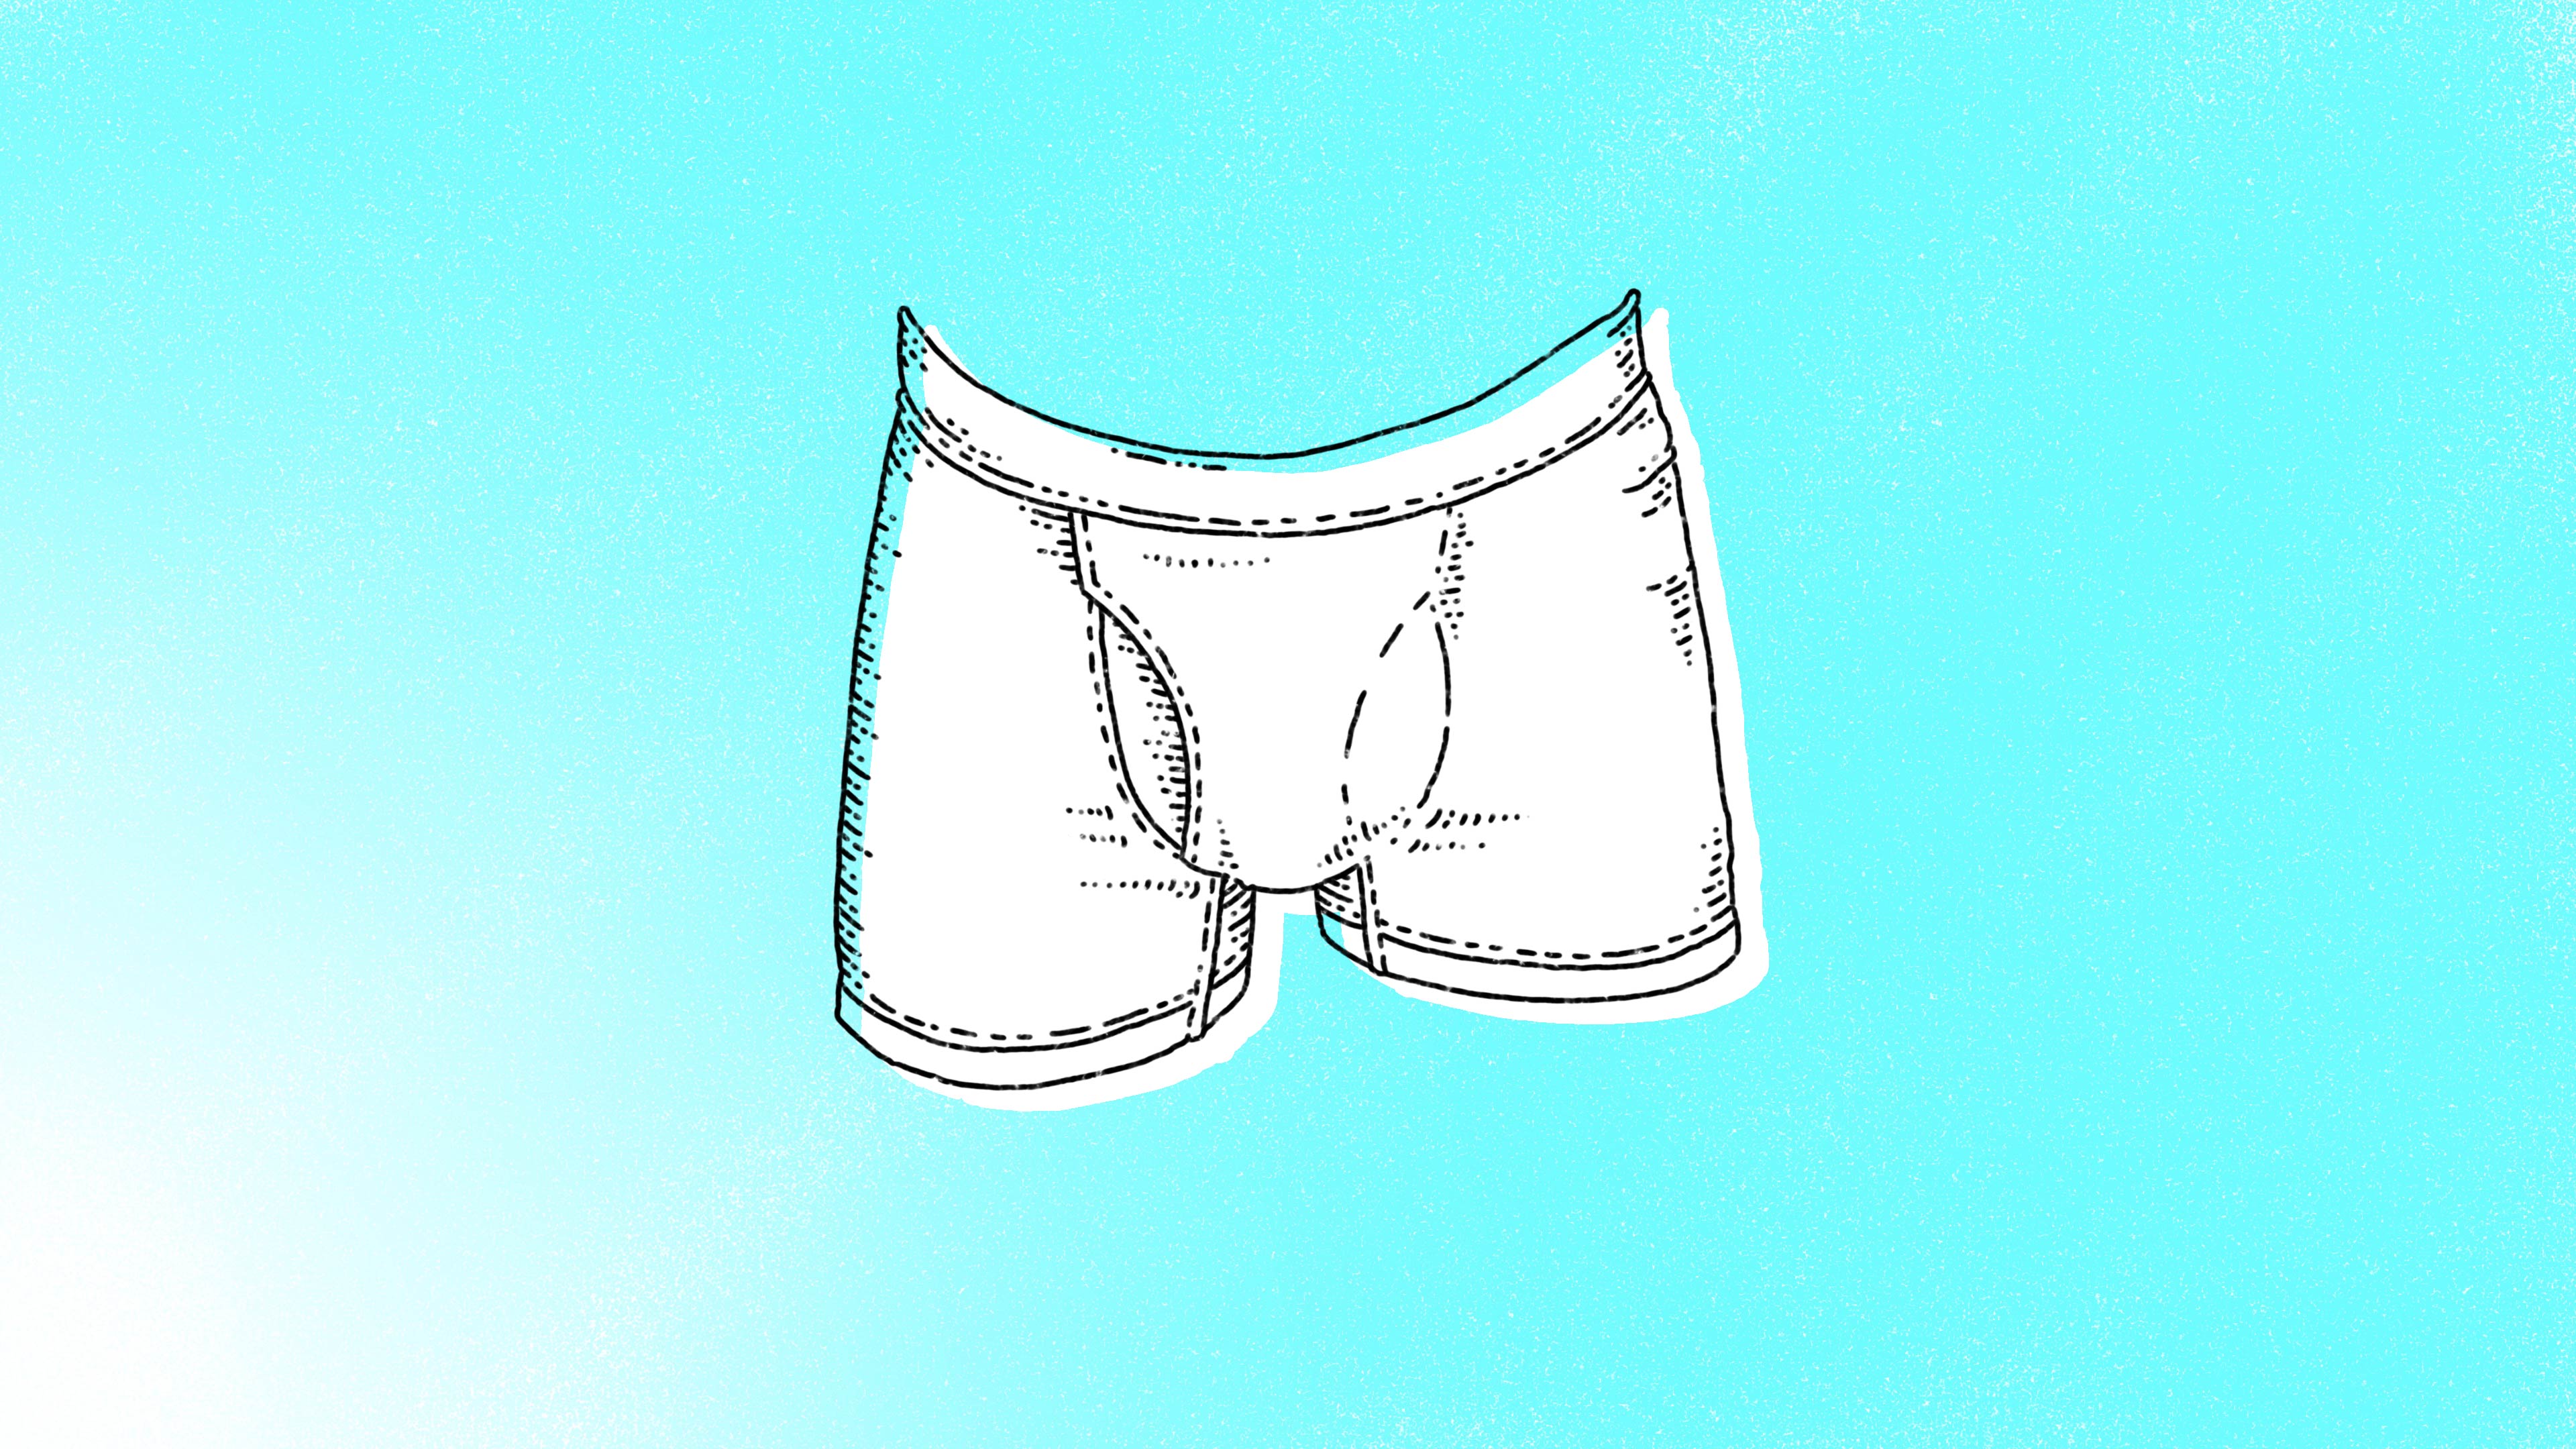 A blue background with an illustration of trunk-style underwear.